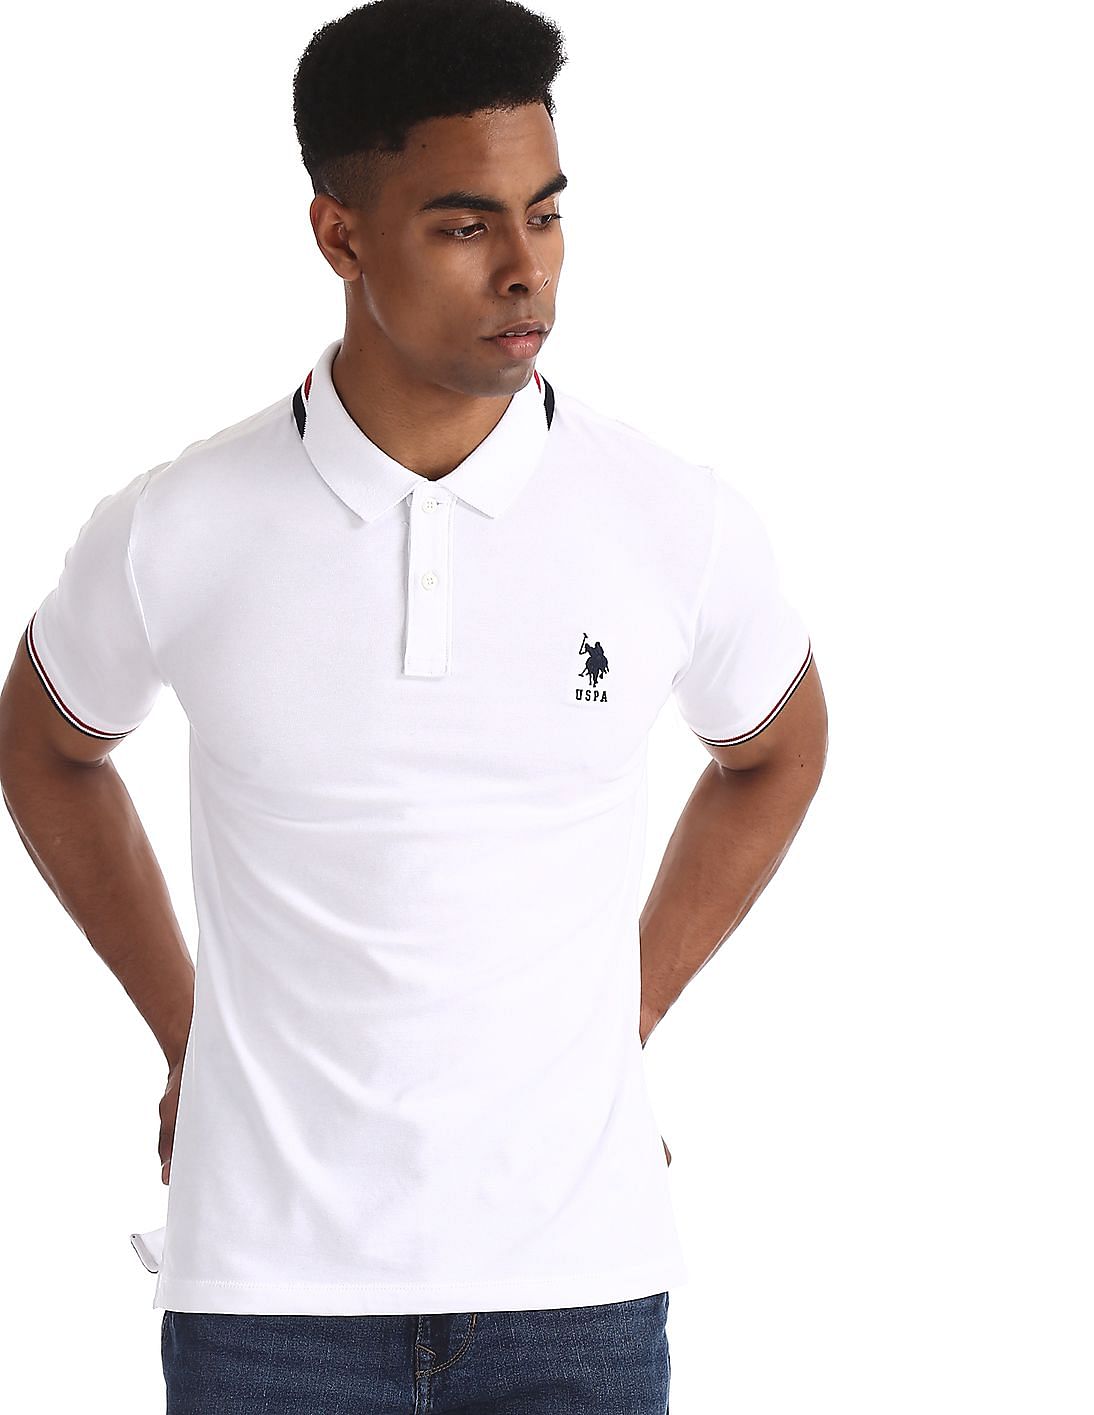 Buy Men White Tipped Solid Polo Shirt online at NNNOW.com